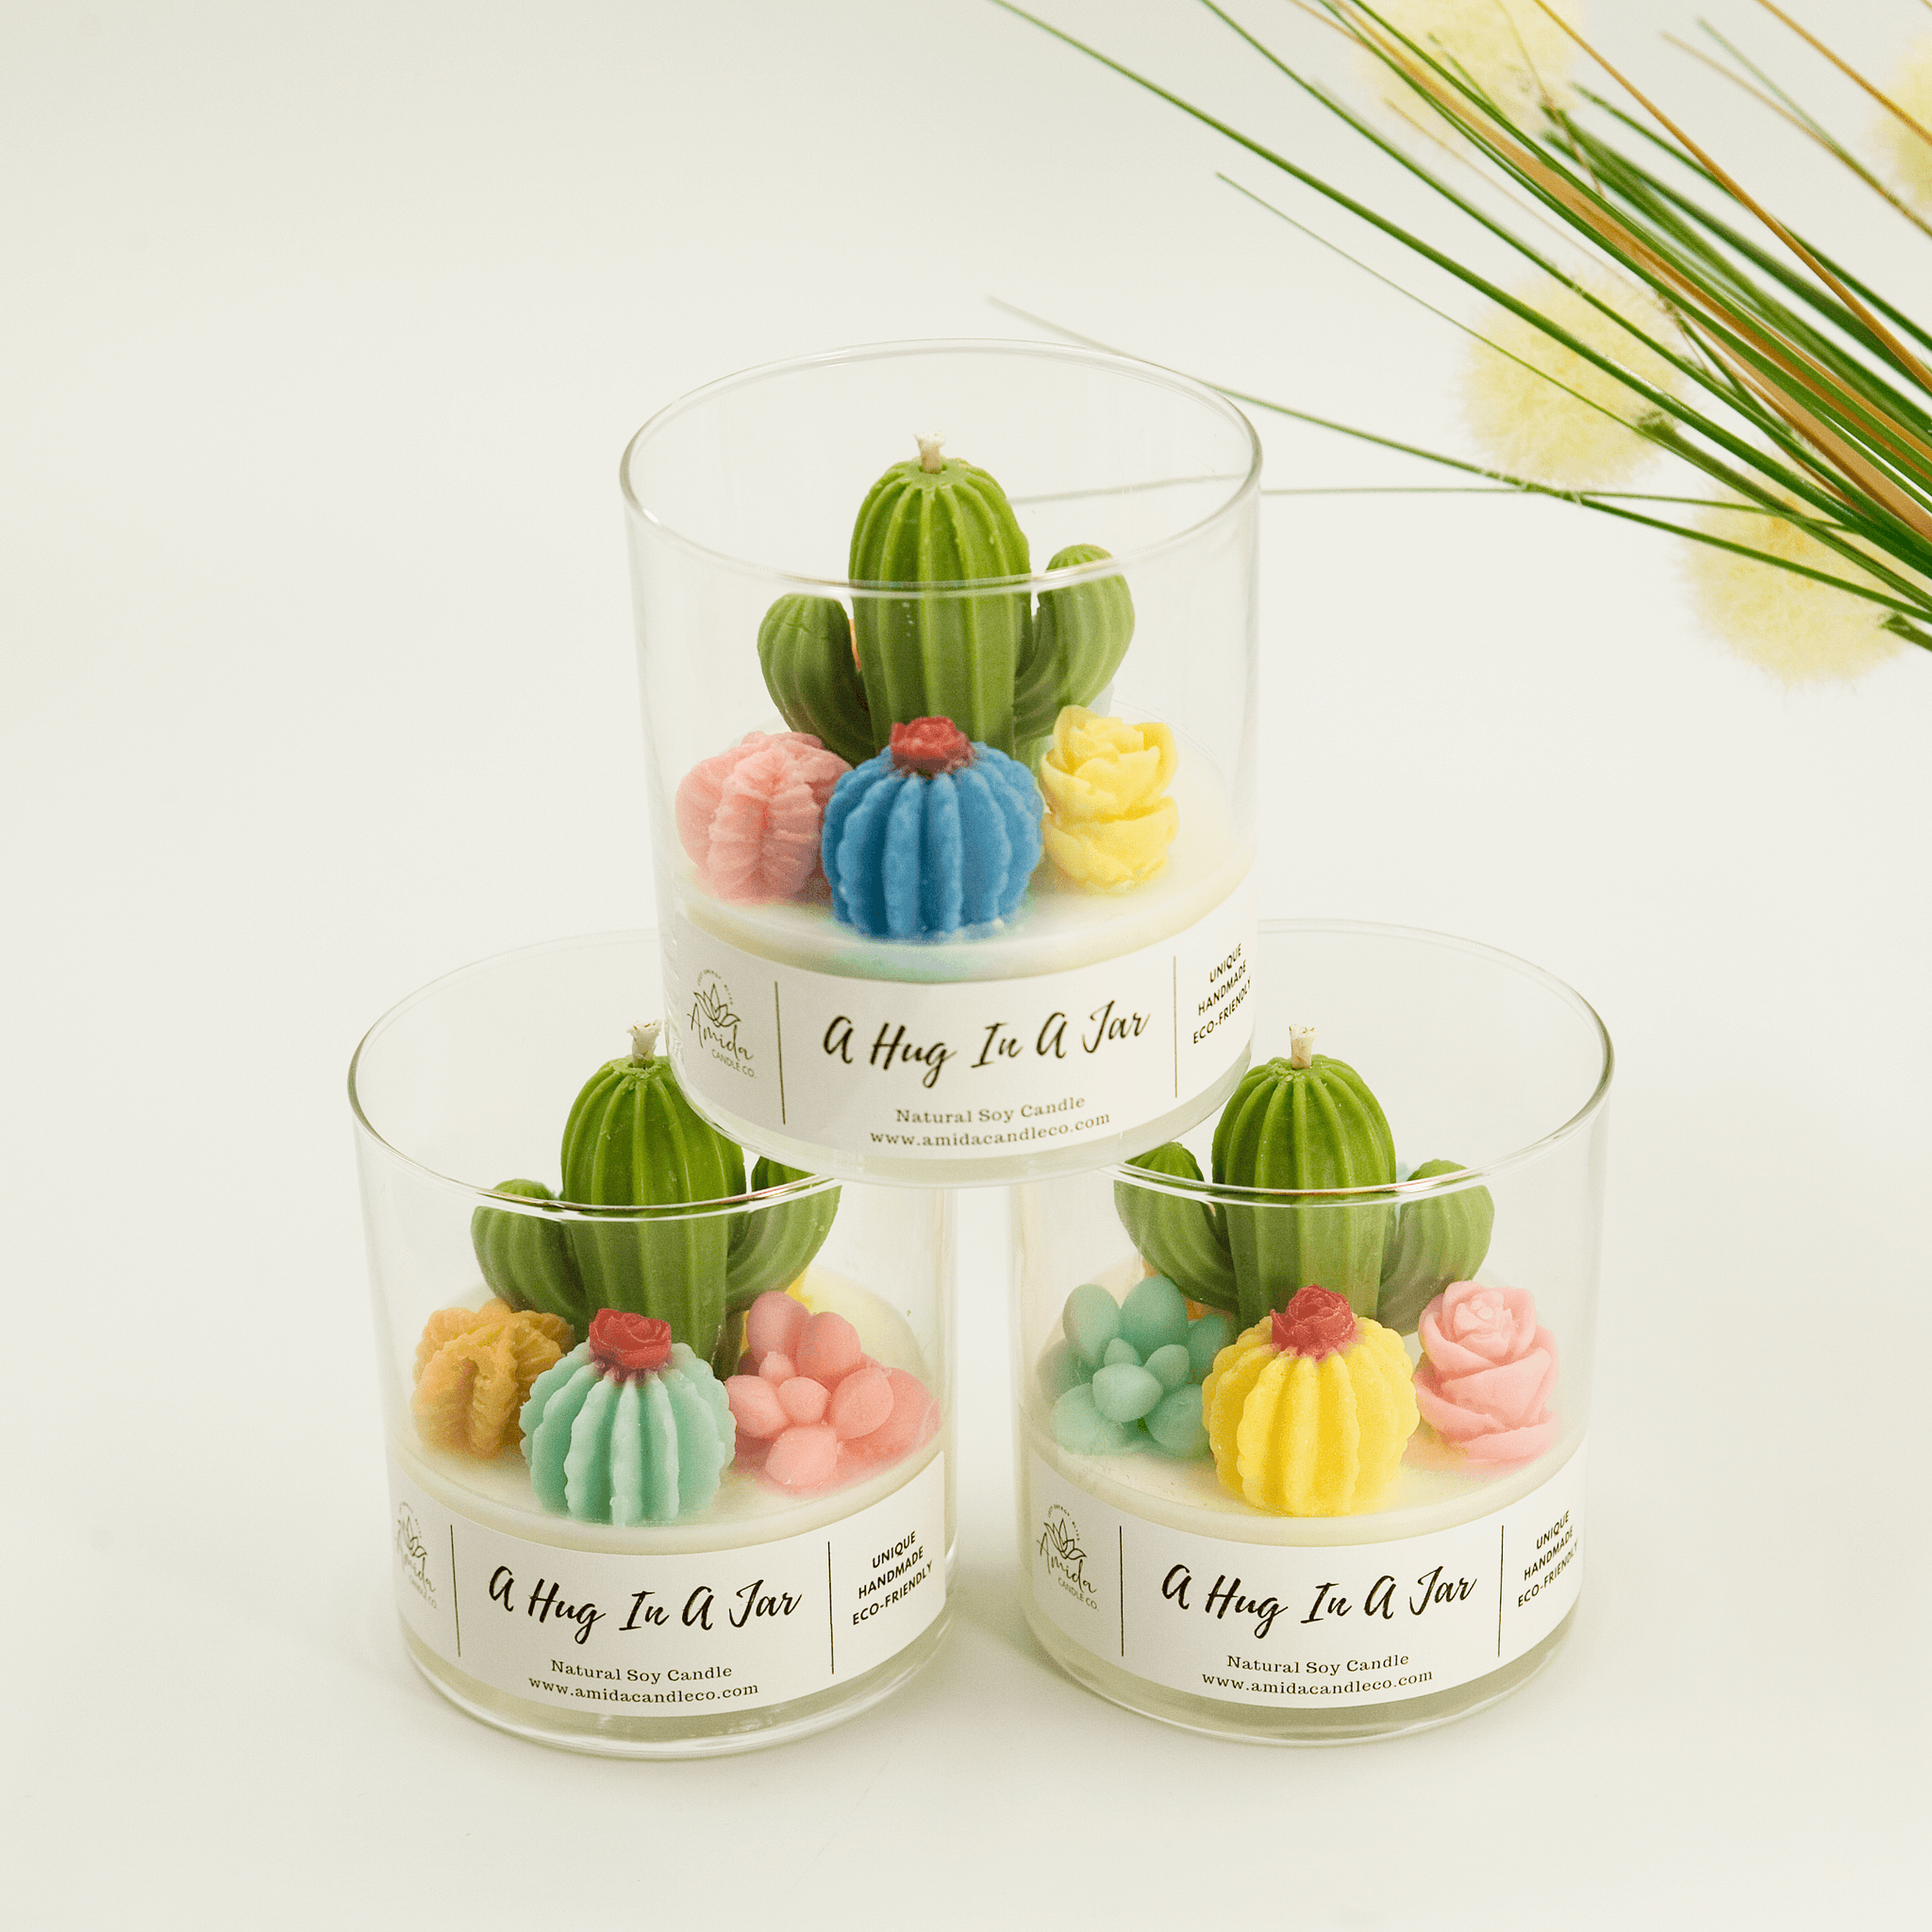 amida candle co., homemade candles, terrarium soy candle, cactus cacti candle, vagan candle, birthday gifts, girlfriend gift, anniversary gift, coffee table decor candle, lake house decor, bookshelf decor, housewarming gift, farmhouse candle, natural scented, ready to ship, luxury candle, pure soy wax